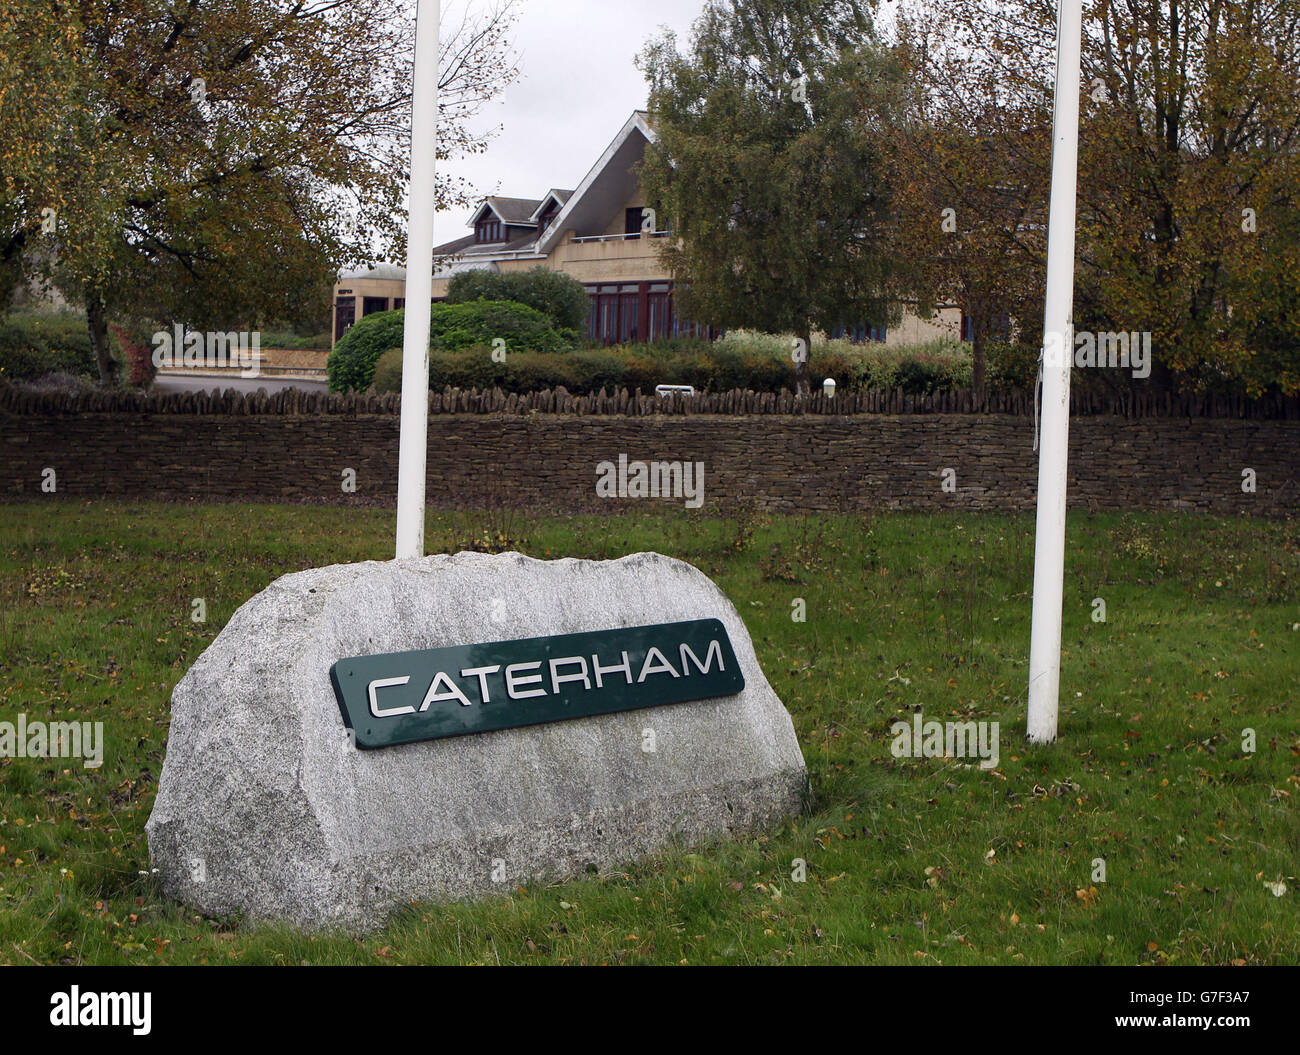 Formula One Motor Racing - Caterham. Caterham factory in Leafield, Oxfordshire. Stock Photo